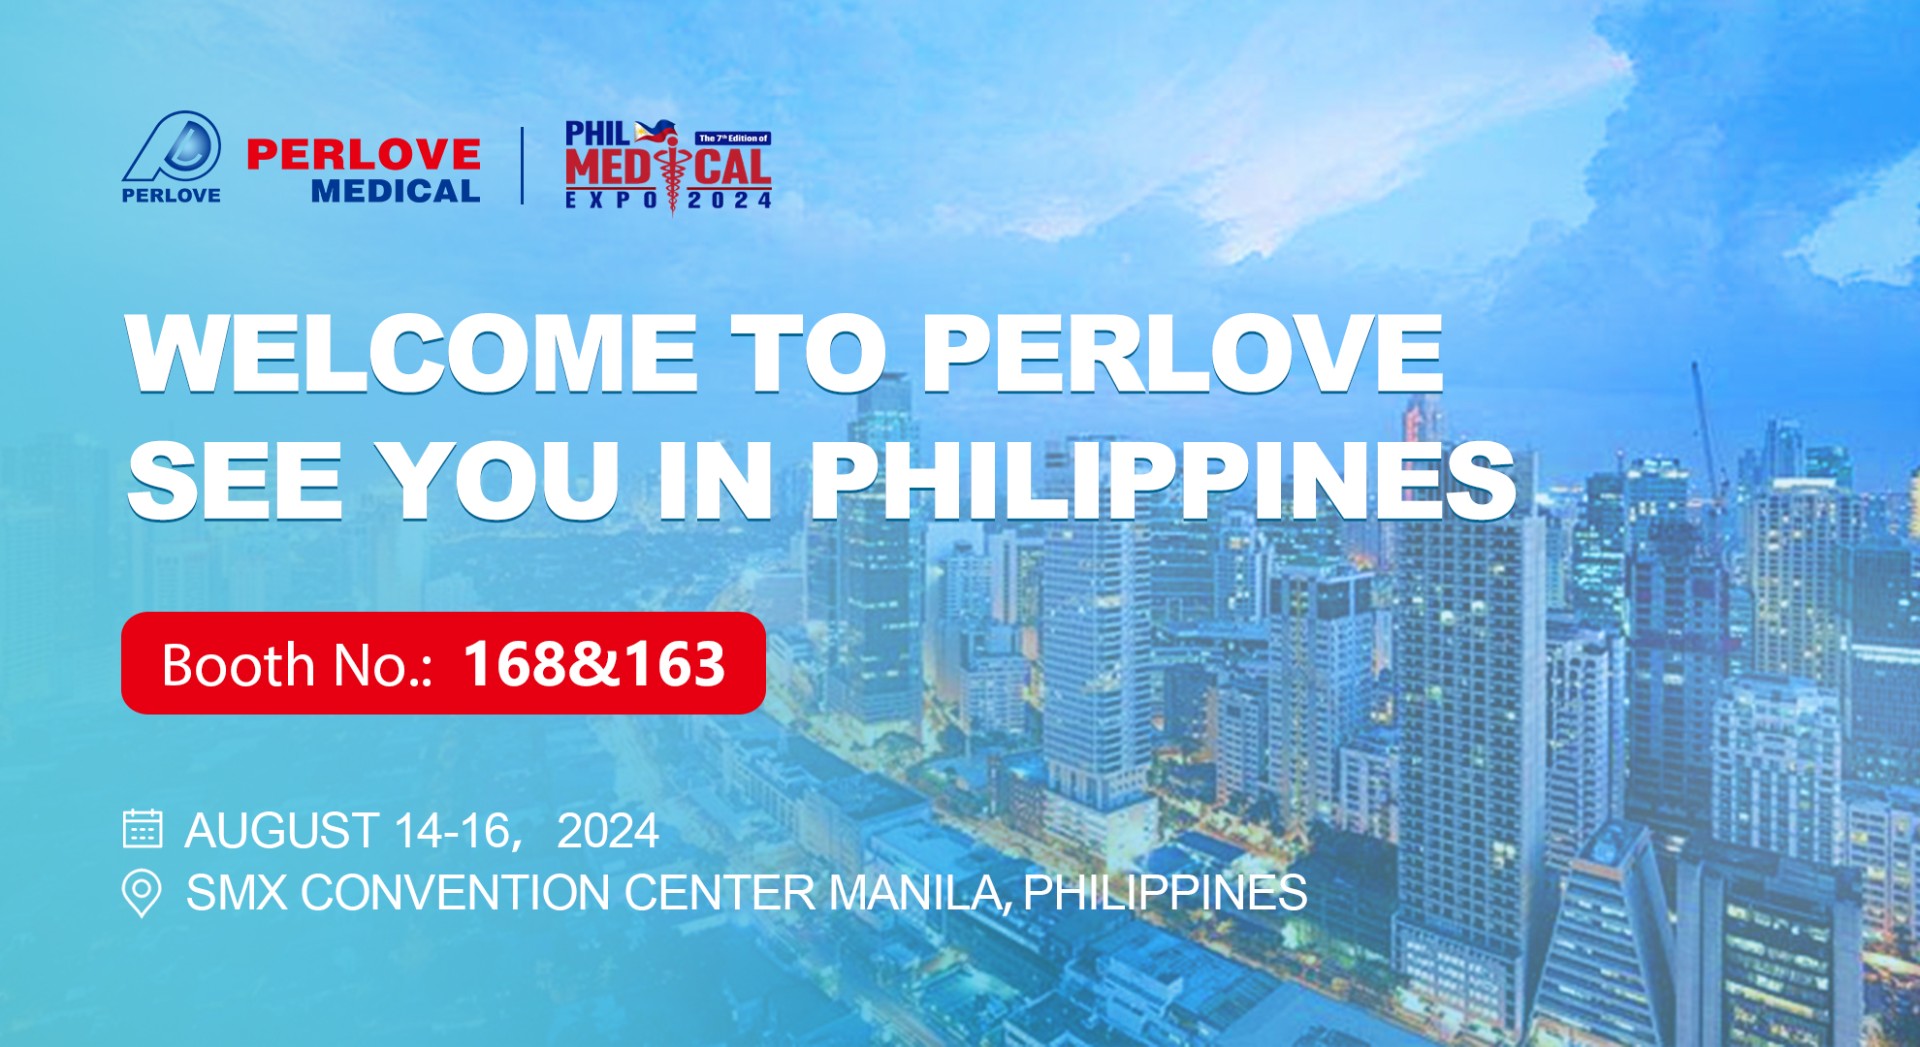 Join us at PhilMedical Expo 2024！